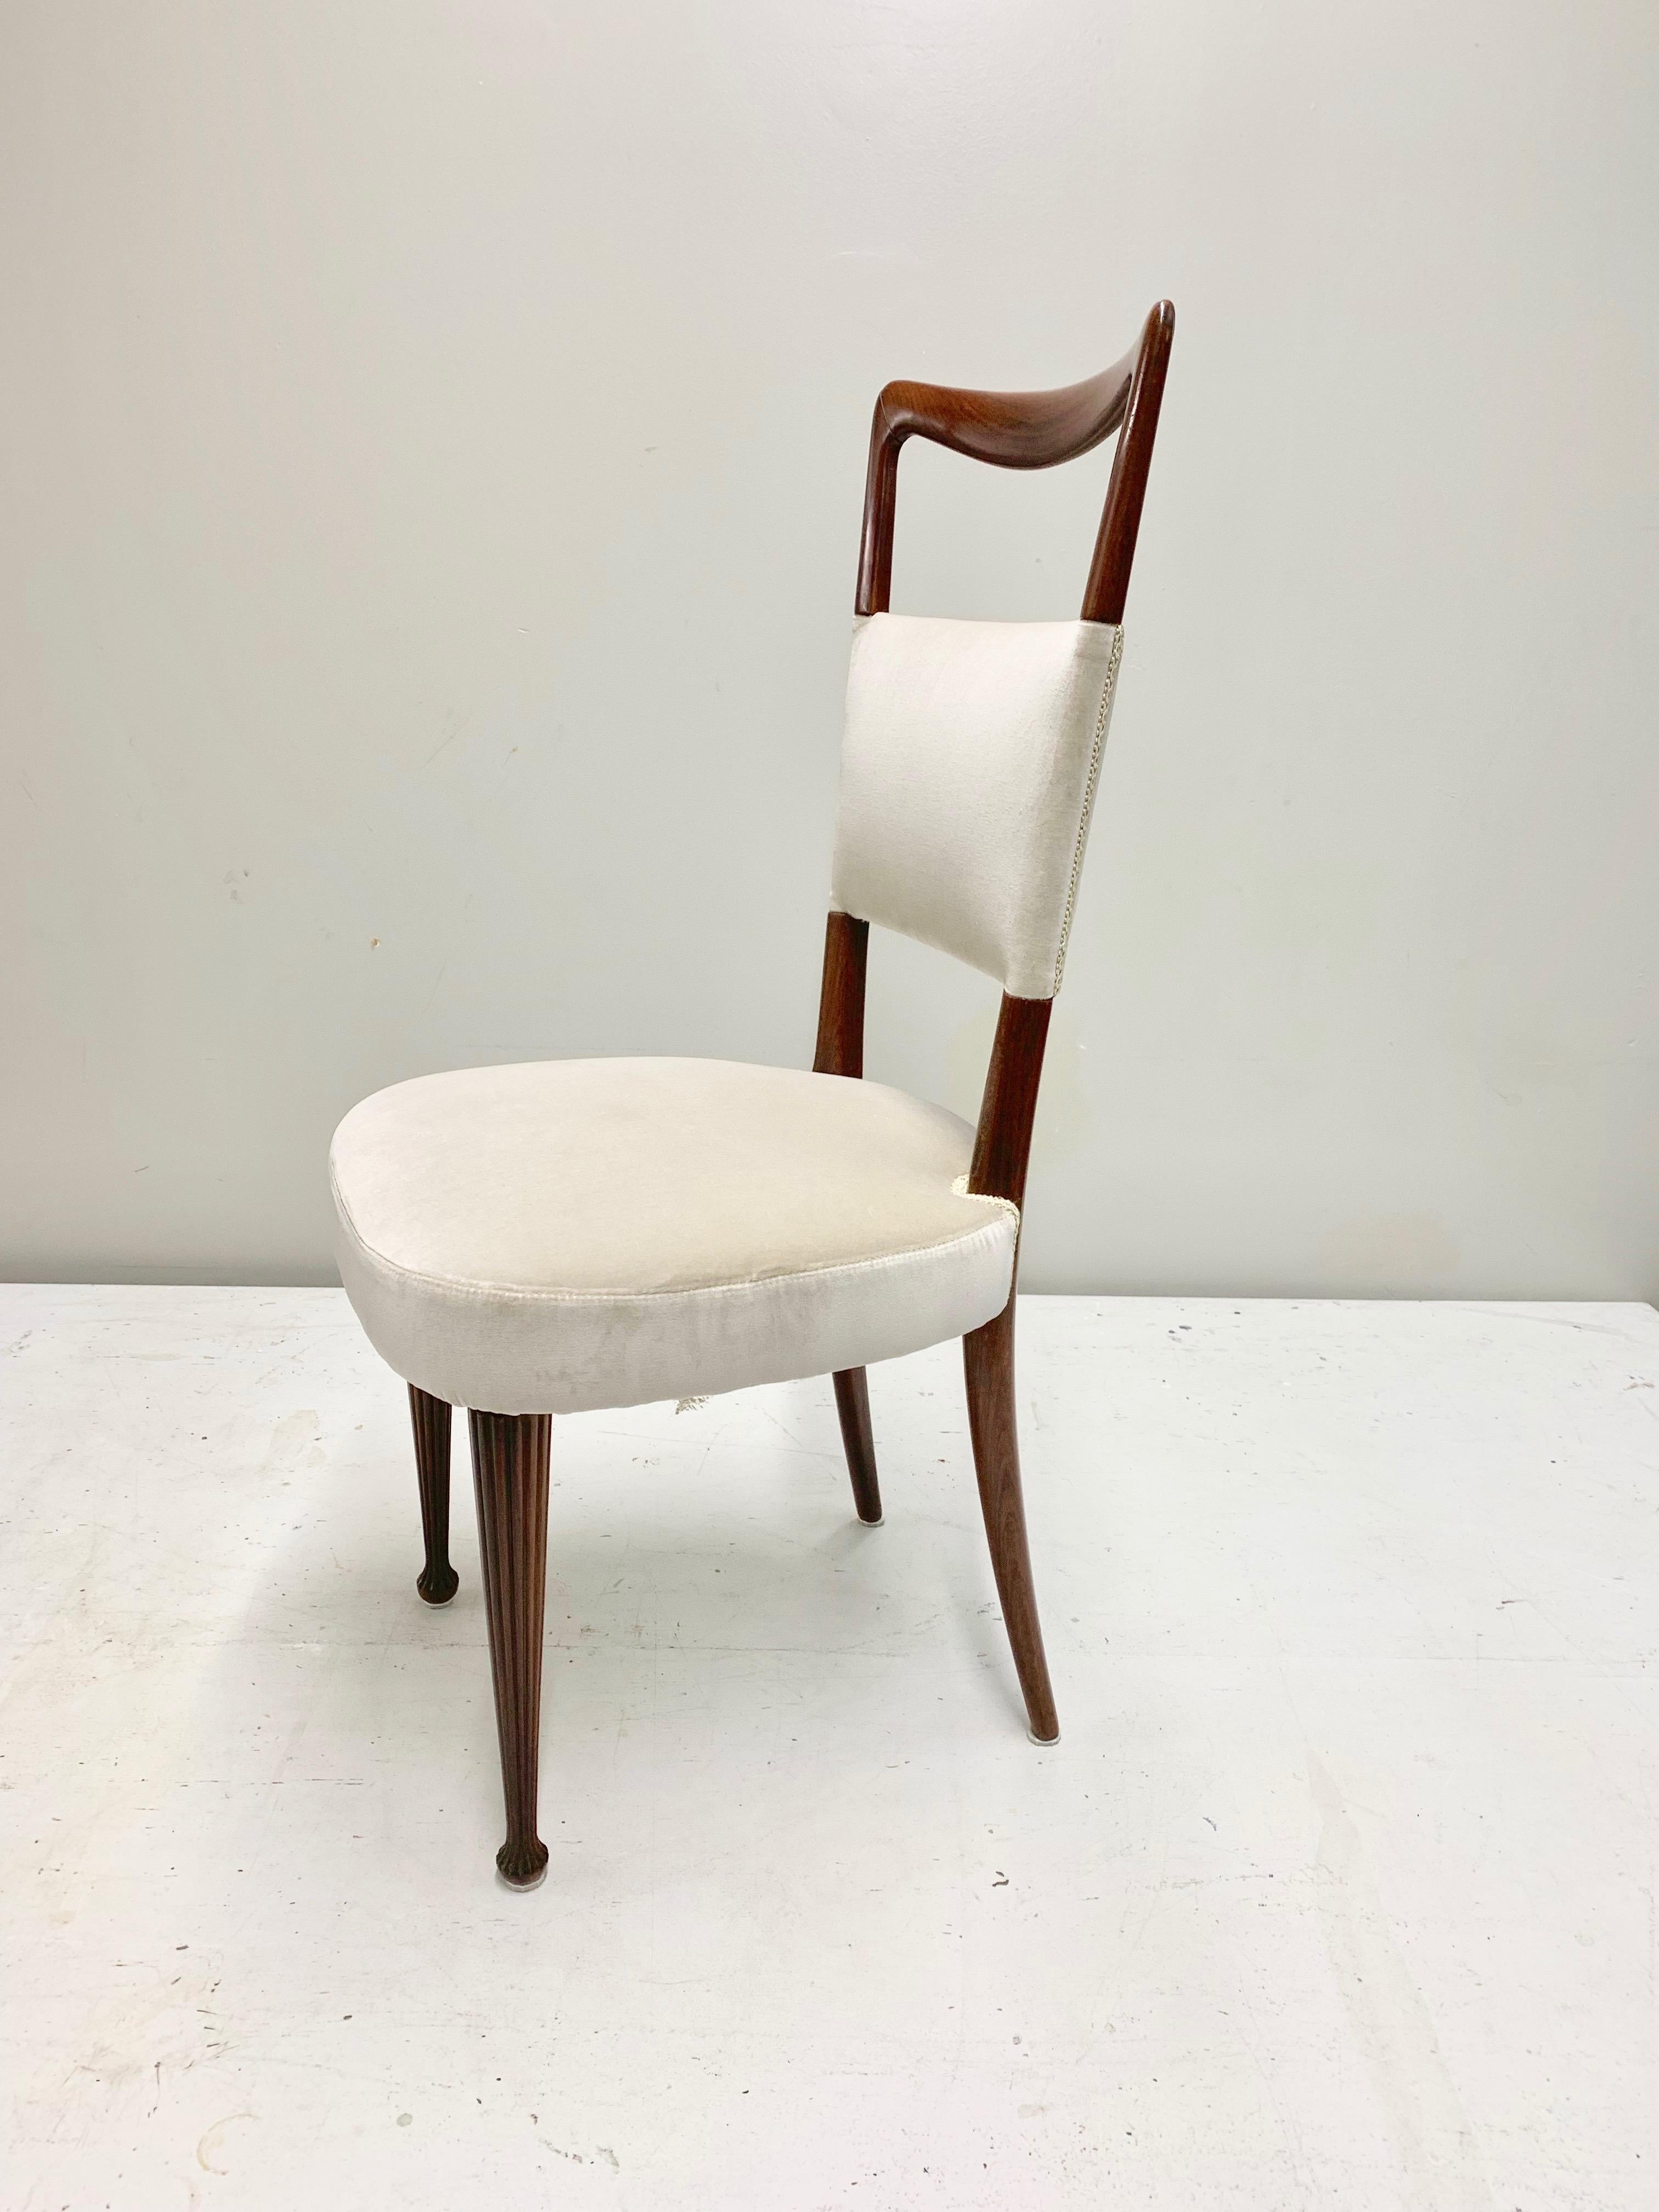 Set of four Osvaldo Borsani dining chairs with a solid and heavy rosewood structure, newly reupholstered with a light gray 100% cotton velvet from Italy. The seat cushion is comfortable and wide, the front legs are carved in the wood and adds up an